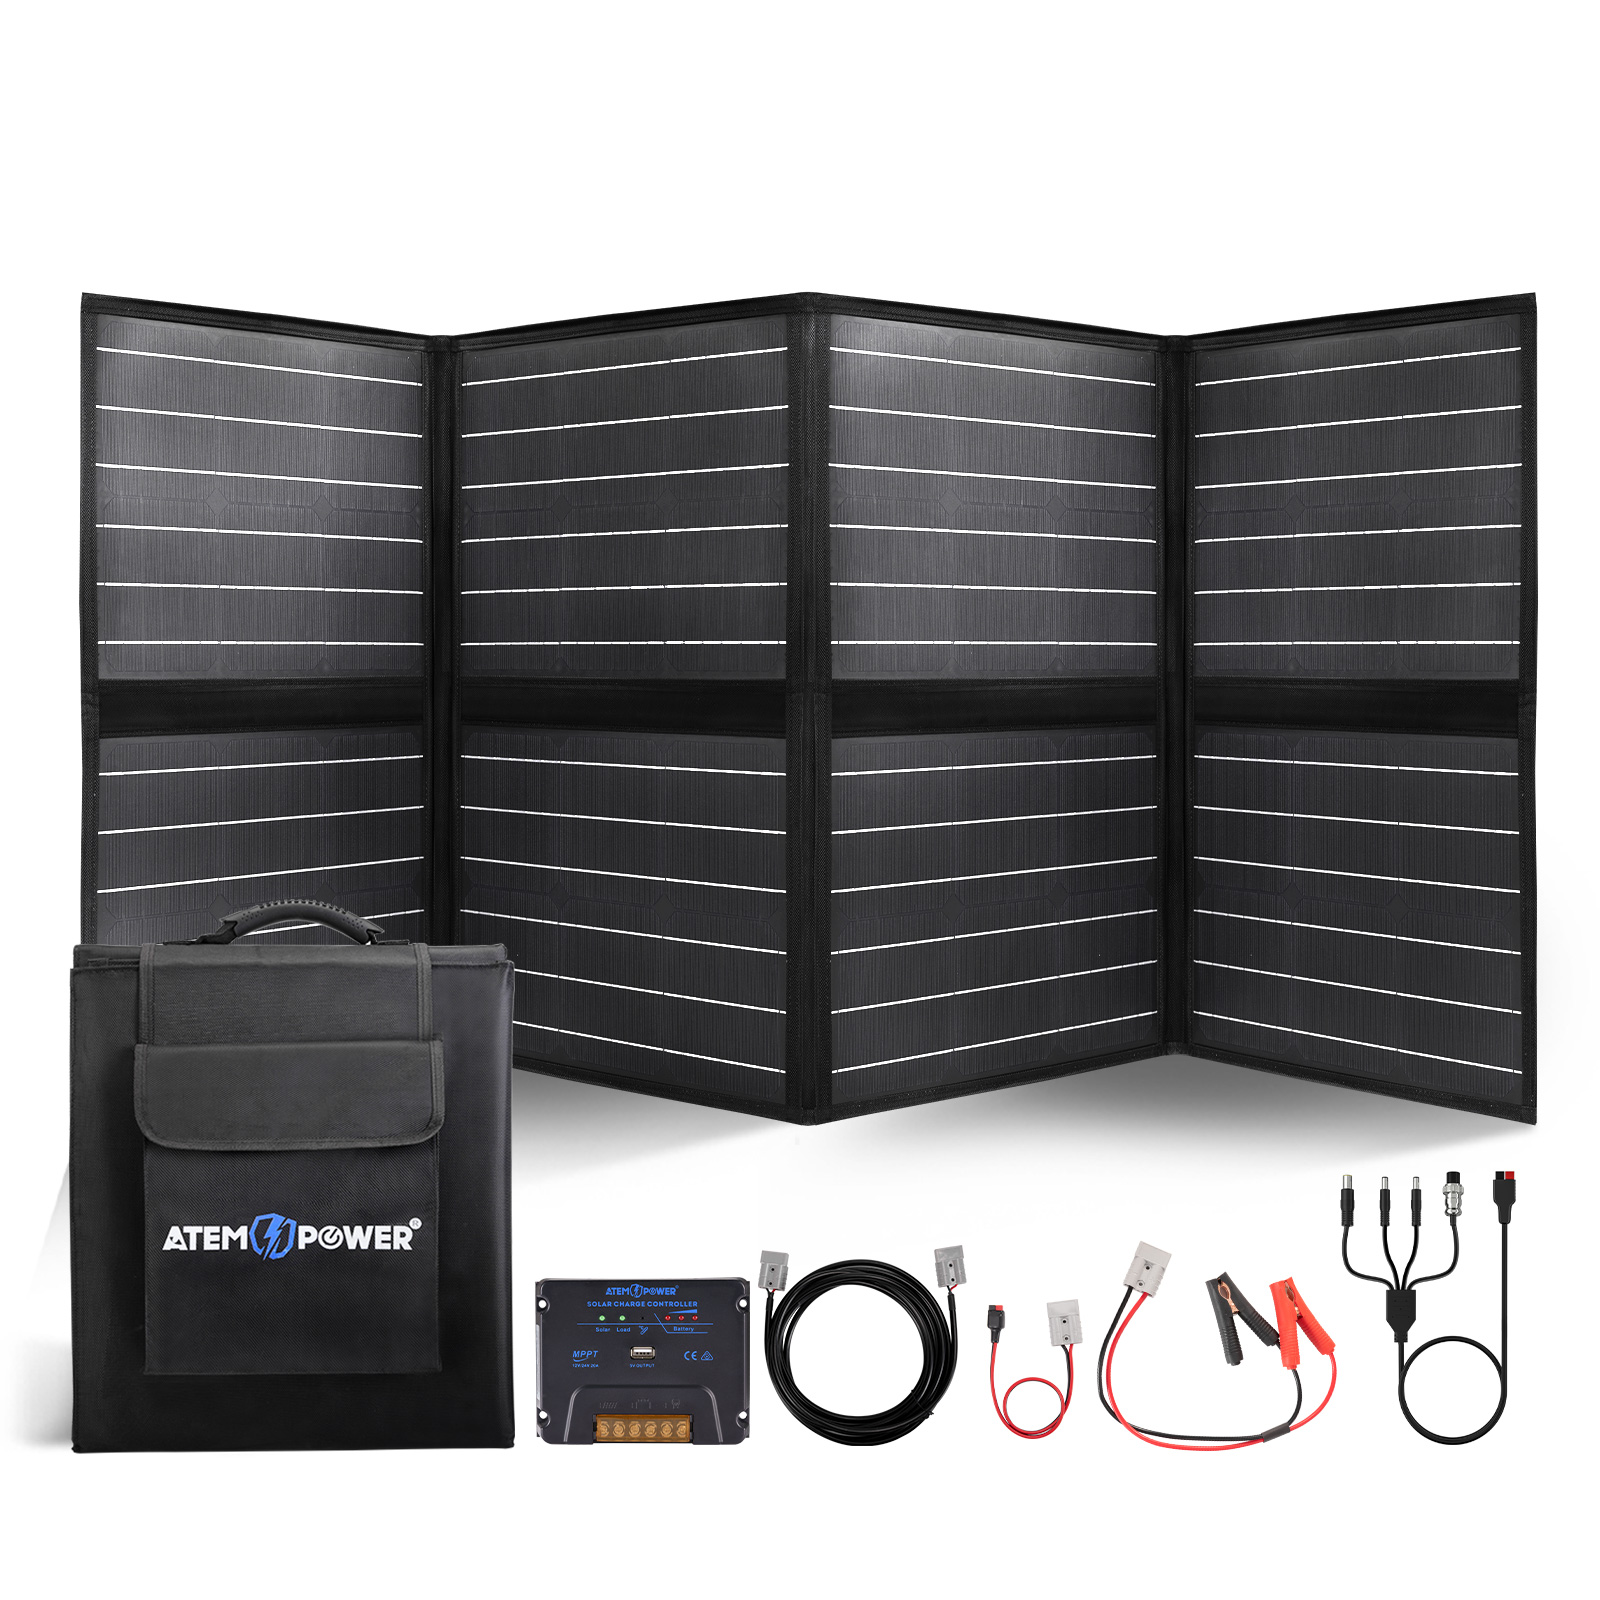 Find US Direct ATEM POWER VASPBAG 2S UFA 200W Portable Monocrystalline Solar Panel Equipped With 20A MPPT Charger Controller Suitable For Outdoor RV Boat Camping for Sale on Gipsybee.com with cryptocurrencies